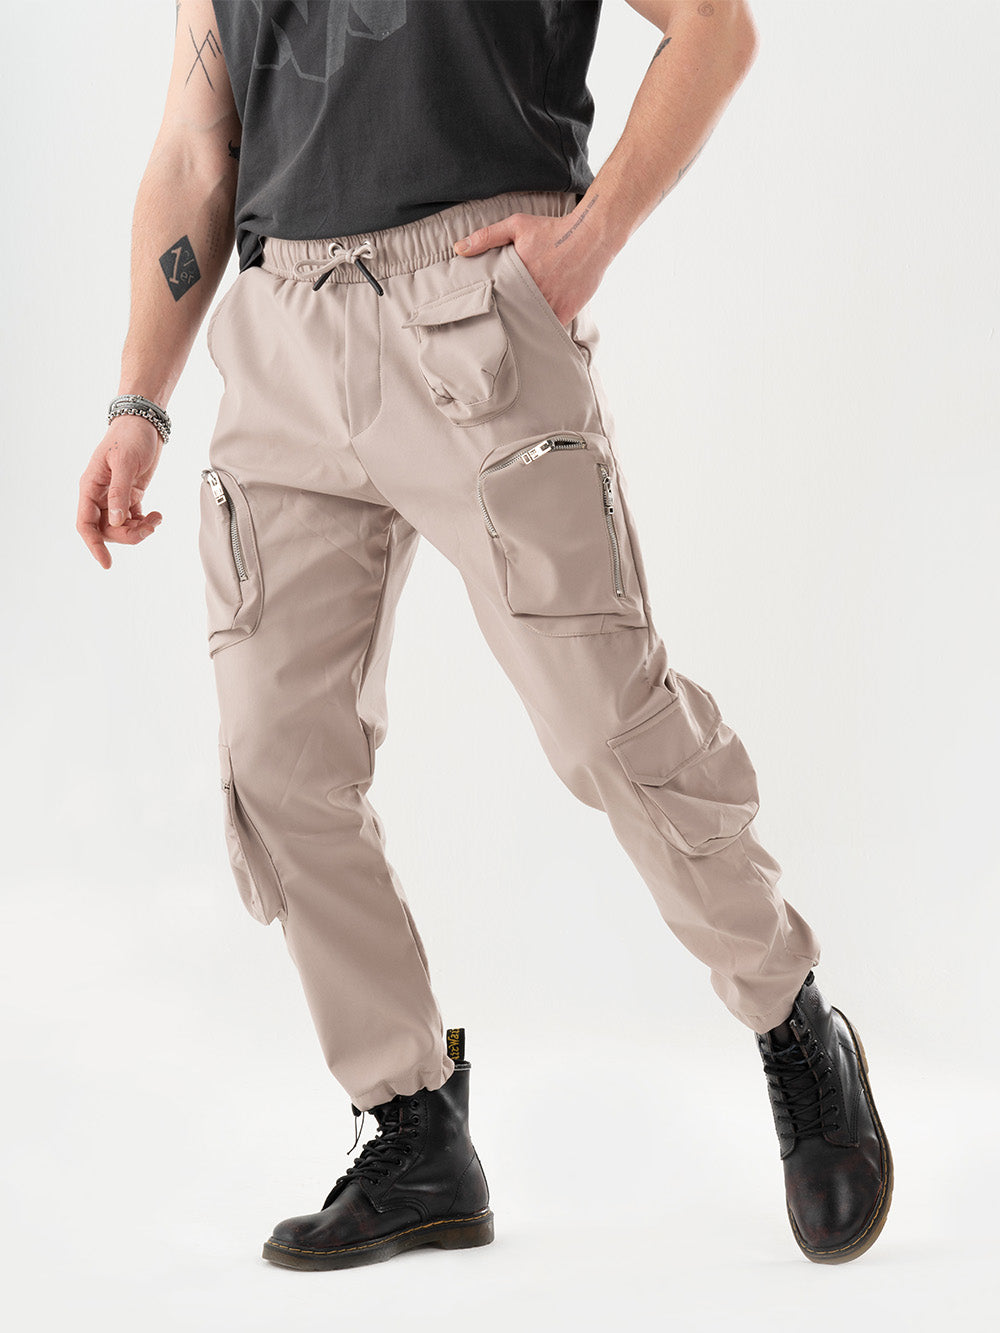 An AMBITION JOGGER wearing comfortable cargo pants with a black t-shirt, combining style and function.